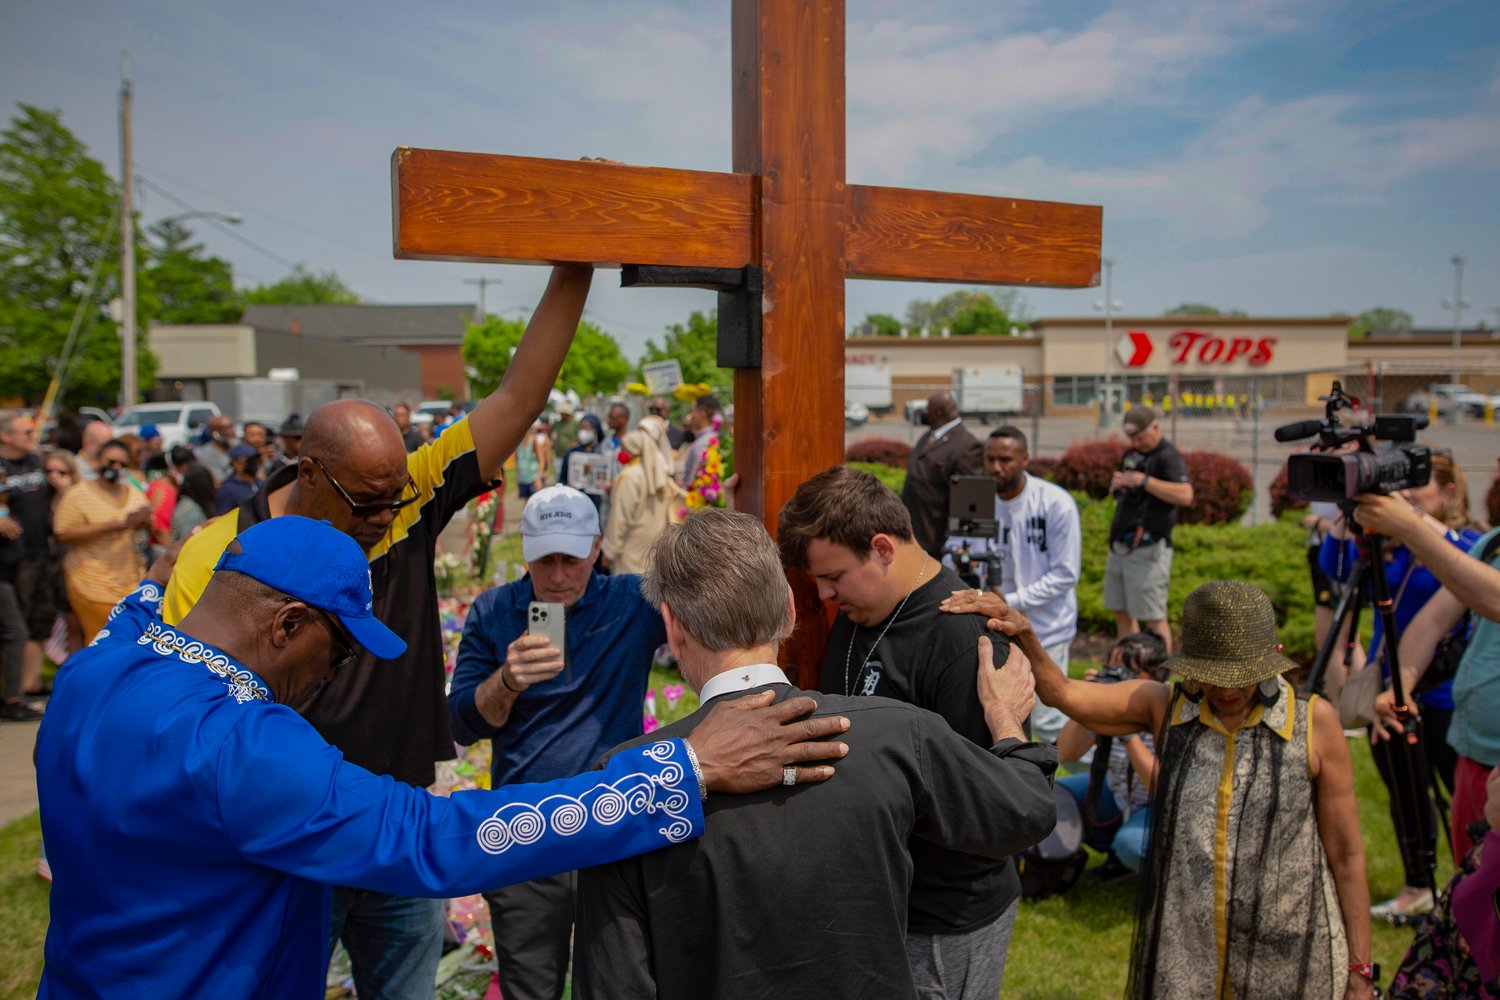 FILE - A group prays at the site of a memorial for the victims of the Buffalo supermarket shooting outside the Tops Friendly Market on Saturday, May 21, 2022, in Buffalo, N.Y. Funeral services are set for Friday for three of those killed: Geraldine Talley, Andre Mackniel and Margus Morrison. They are among the 10 people killed and three wounded May 14 when a white gunman opened fire on shoppers and employees at a Tops Friendly Market.